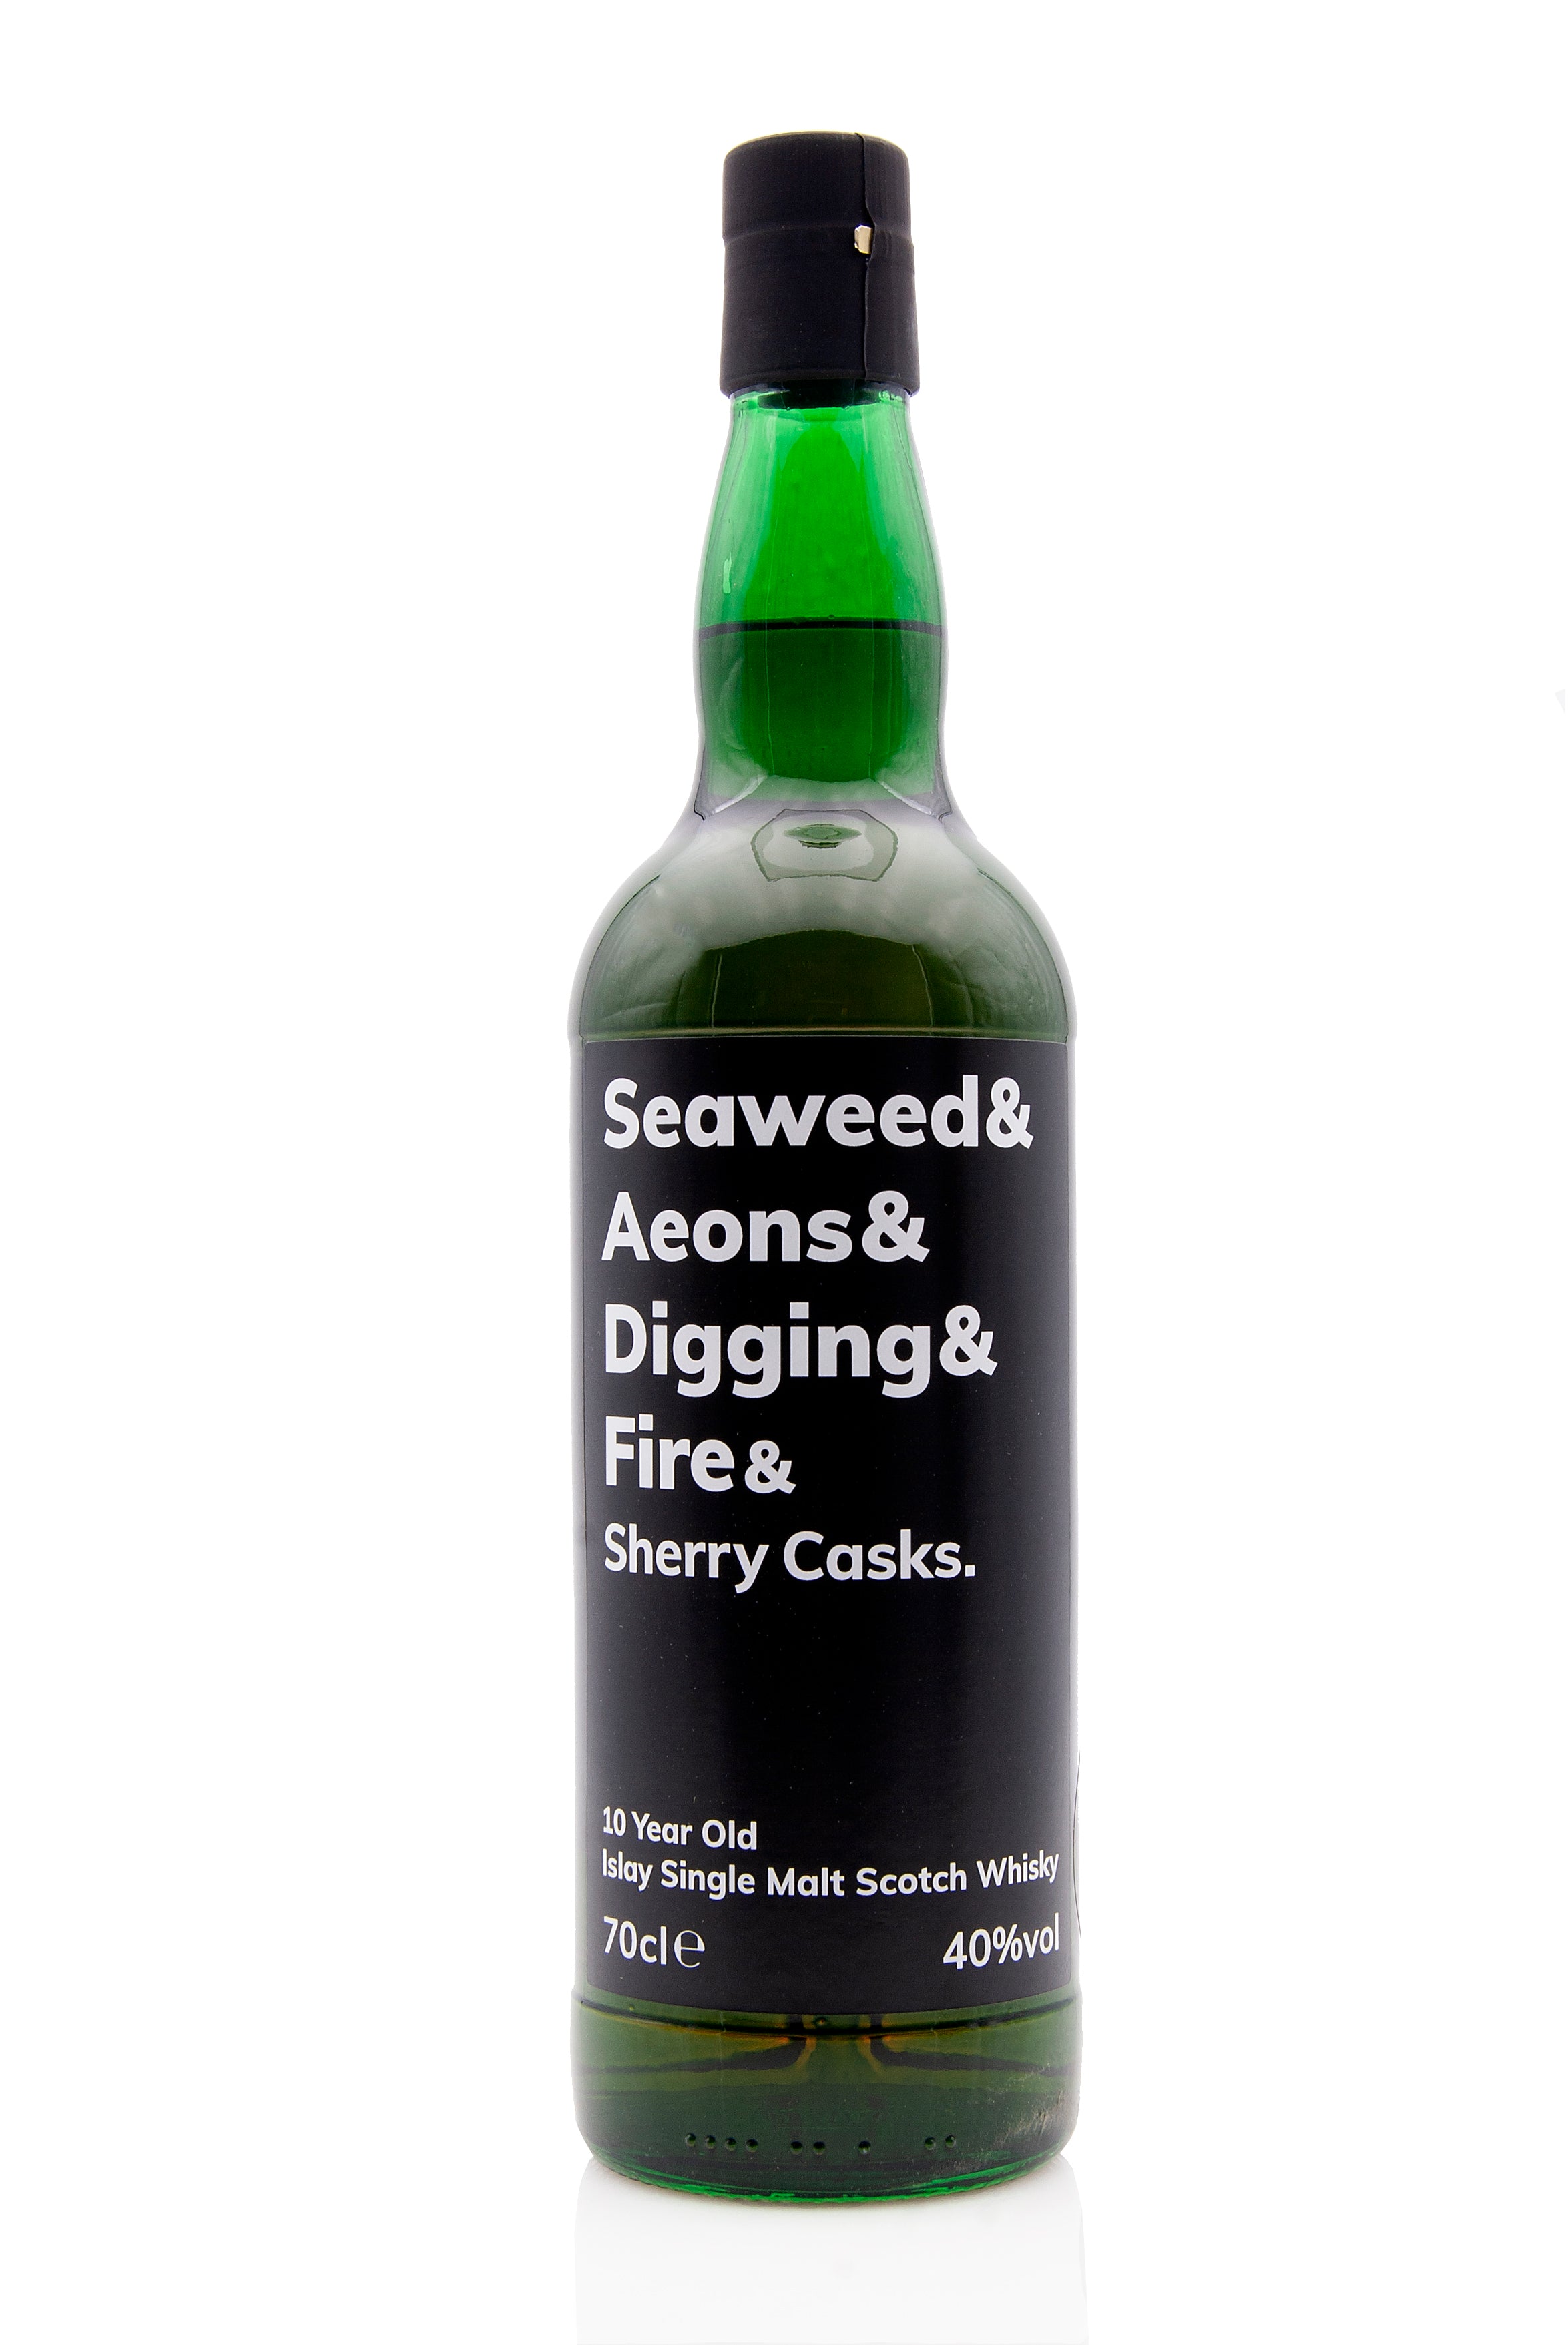 Seaweed & Aeons & Digging & Fire & Sherry Casks 10 Year Old | Abbey Whisky Online